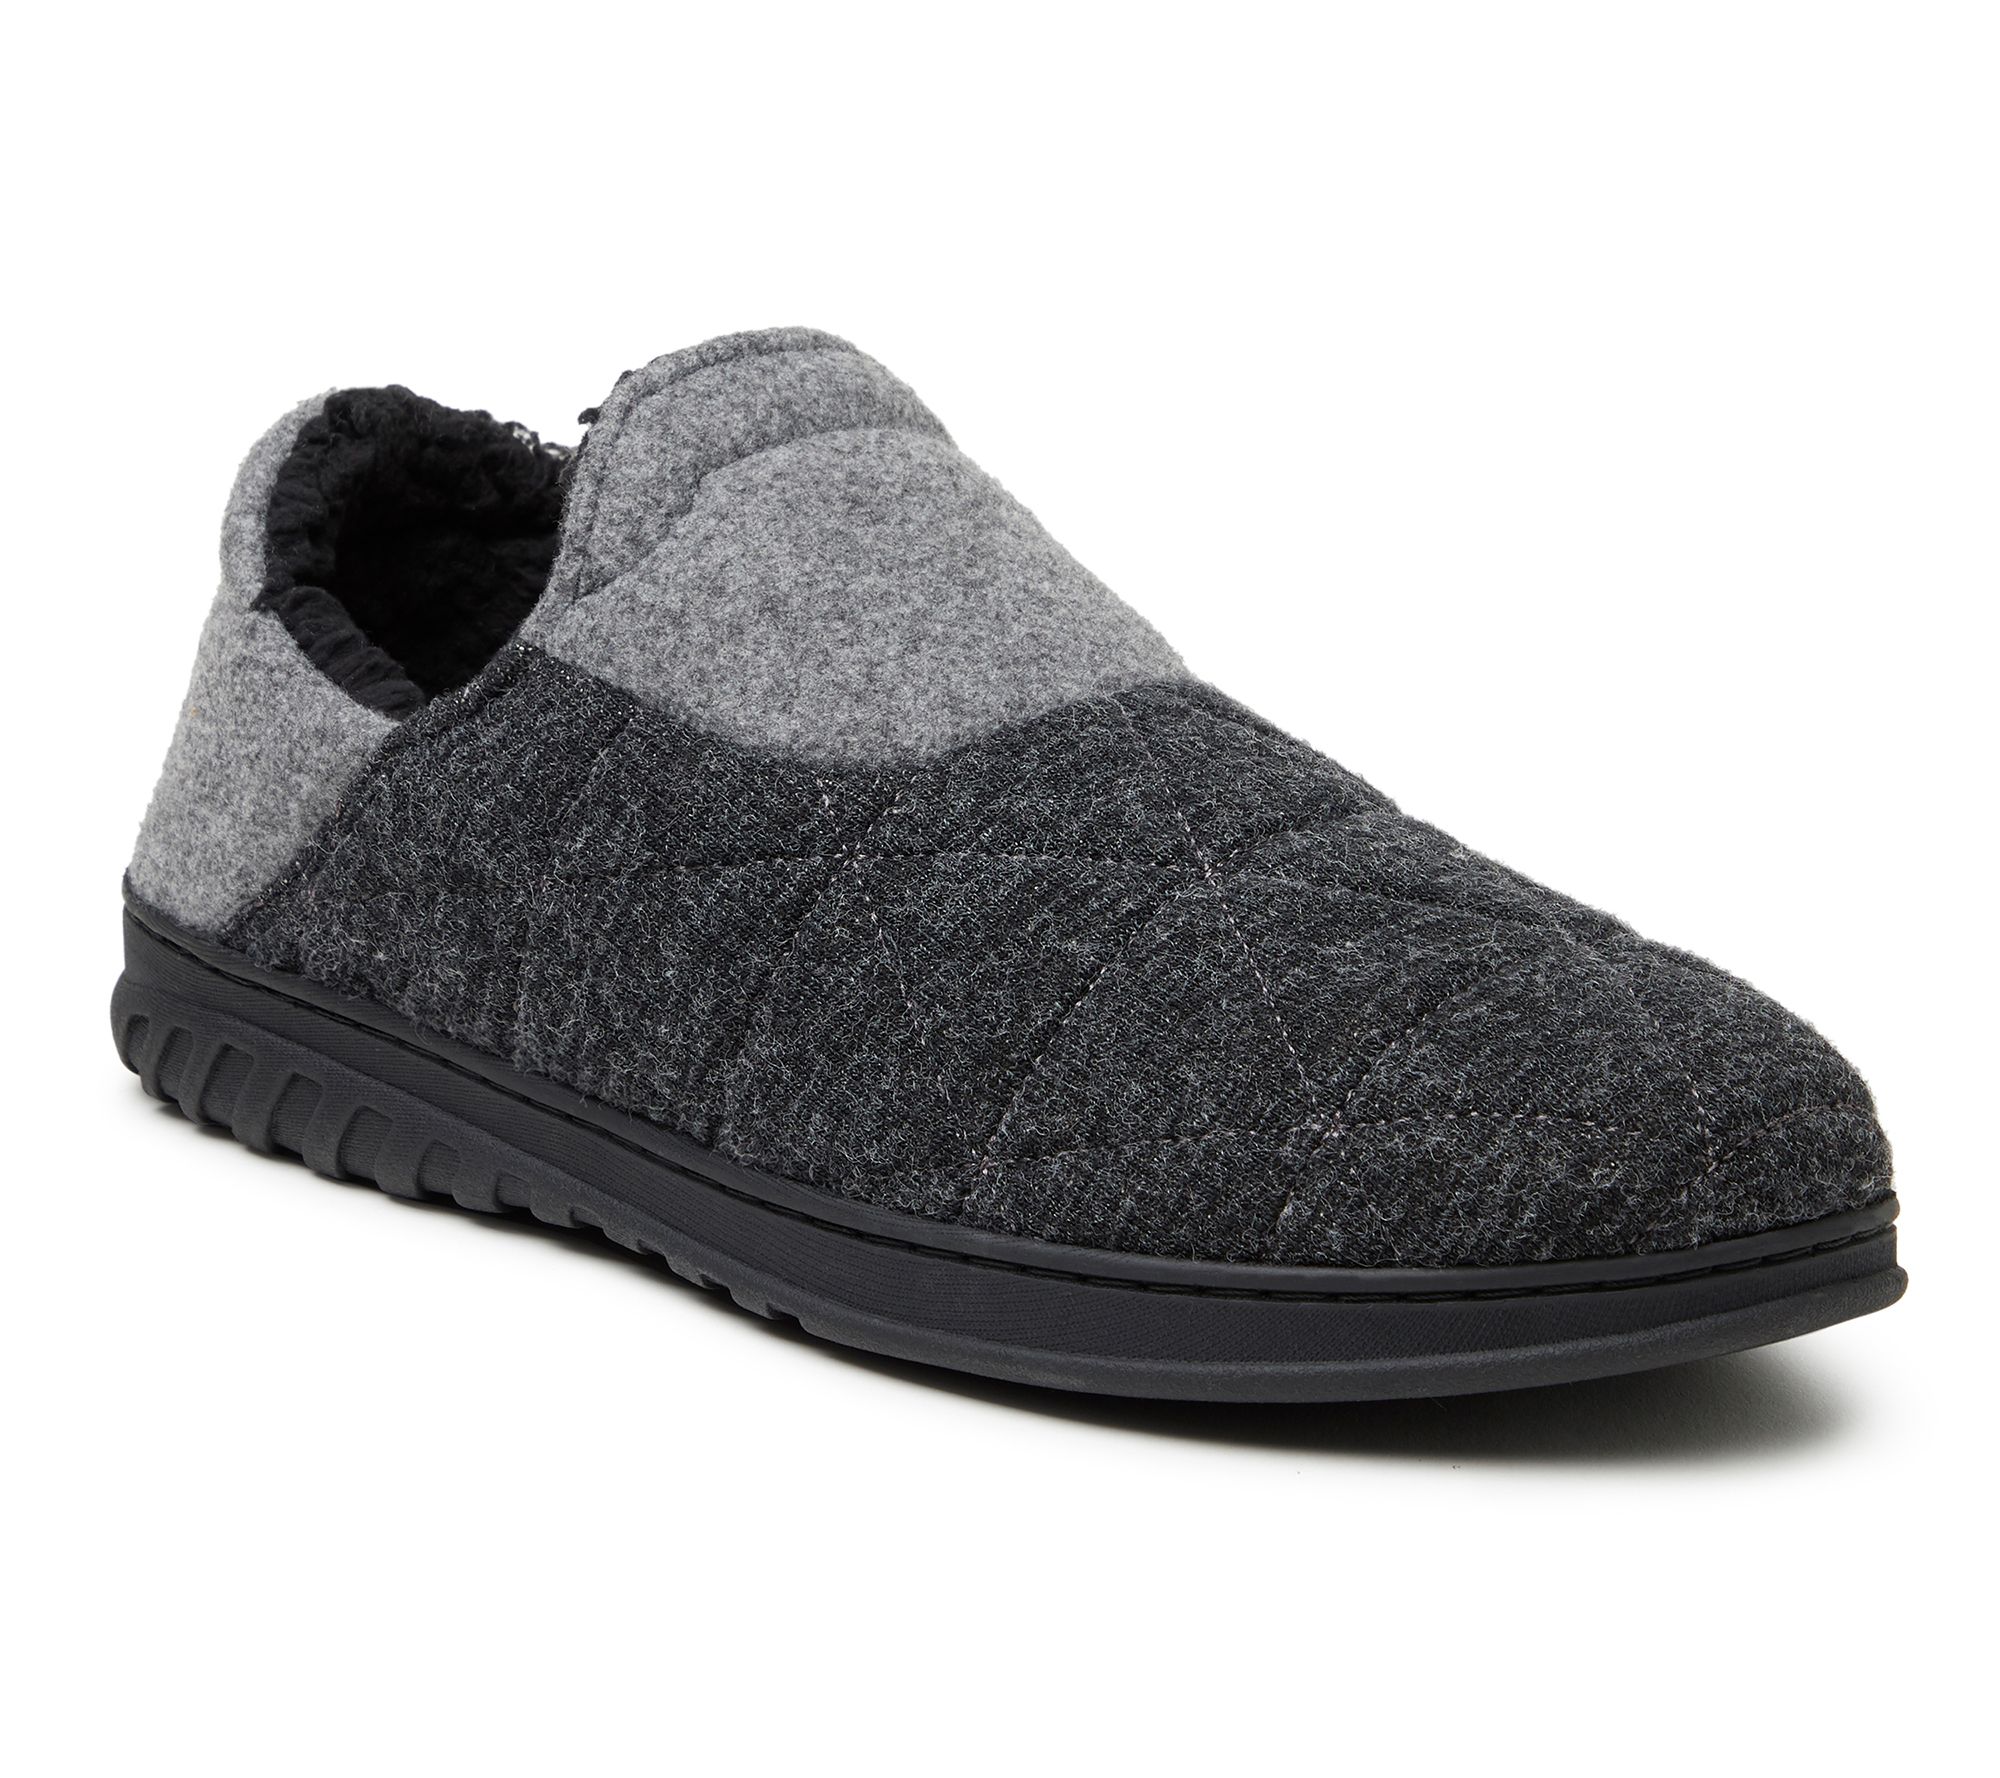 Dearfoams Men's Felted Microwool and Knit Closed Back Slippers - QVC.com